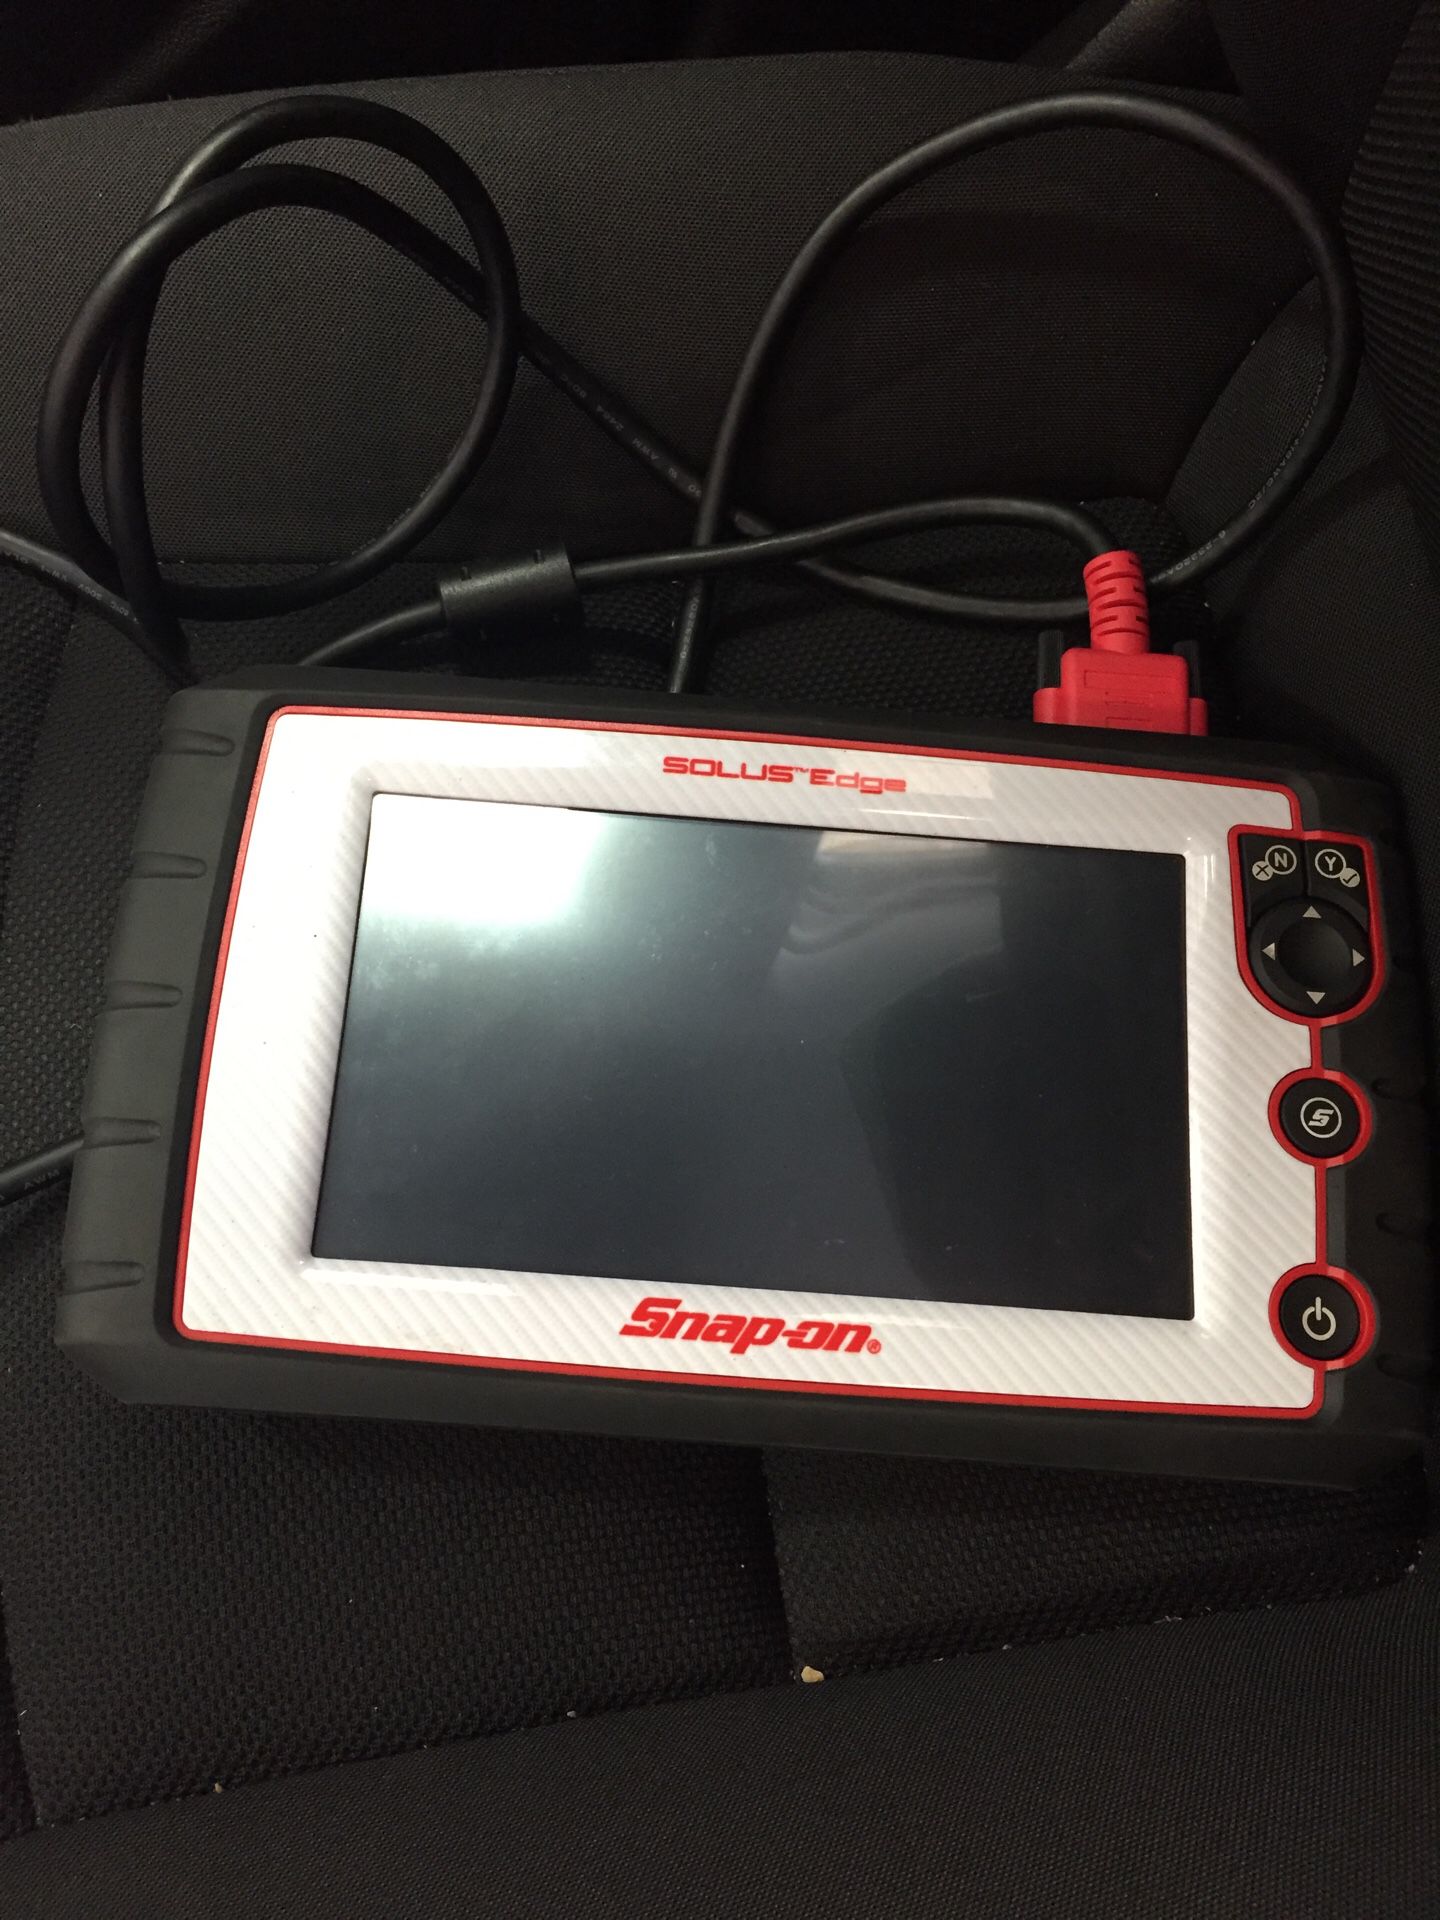 2018 Solis Edge Snap-On Scan Tool